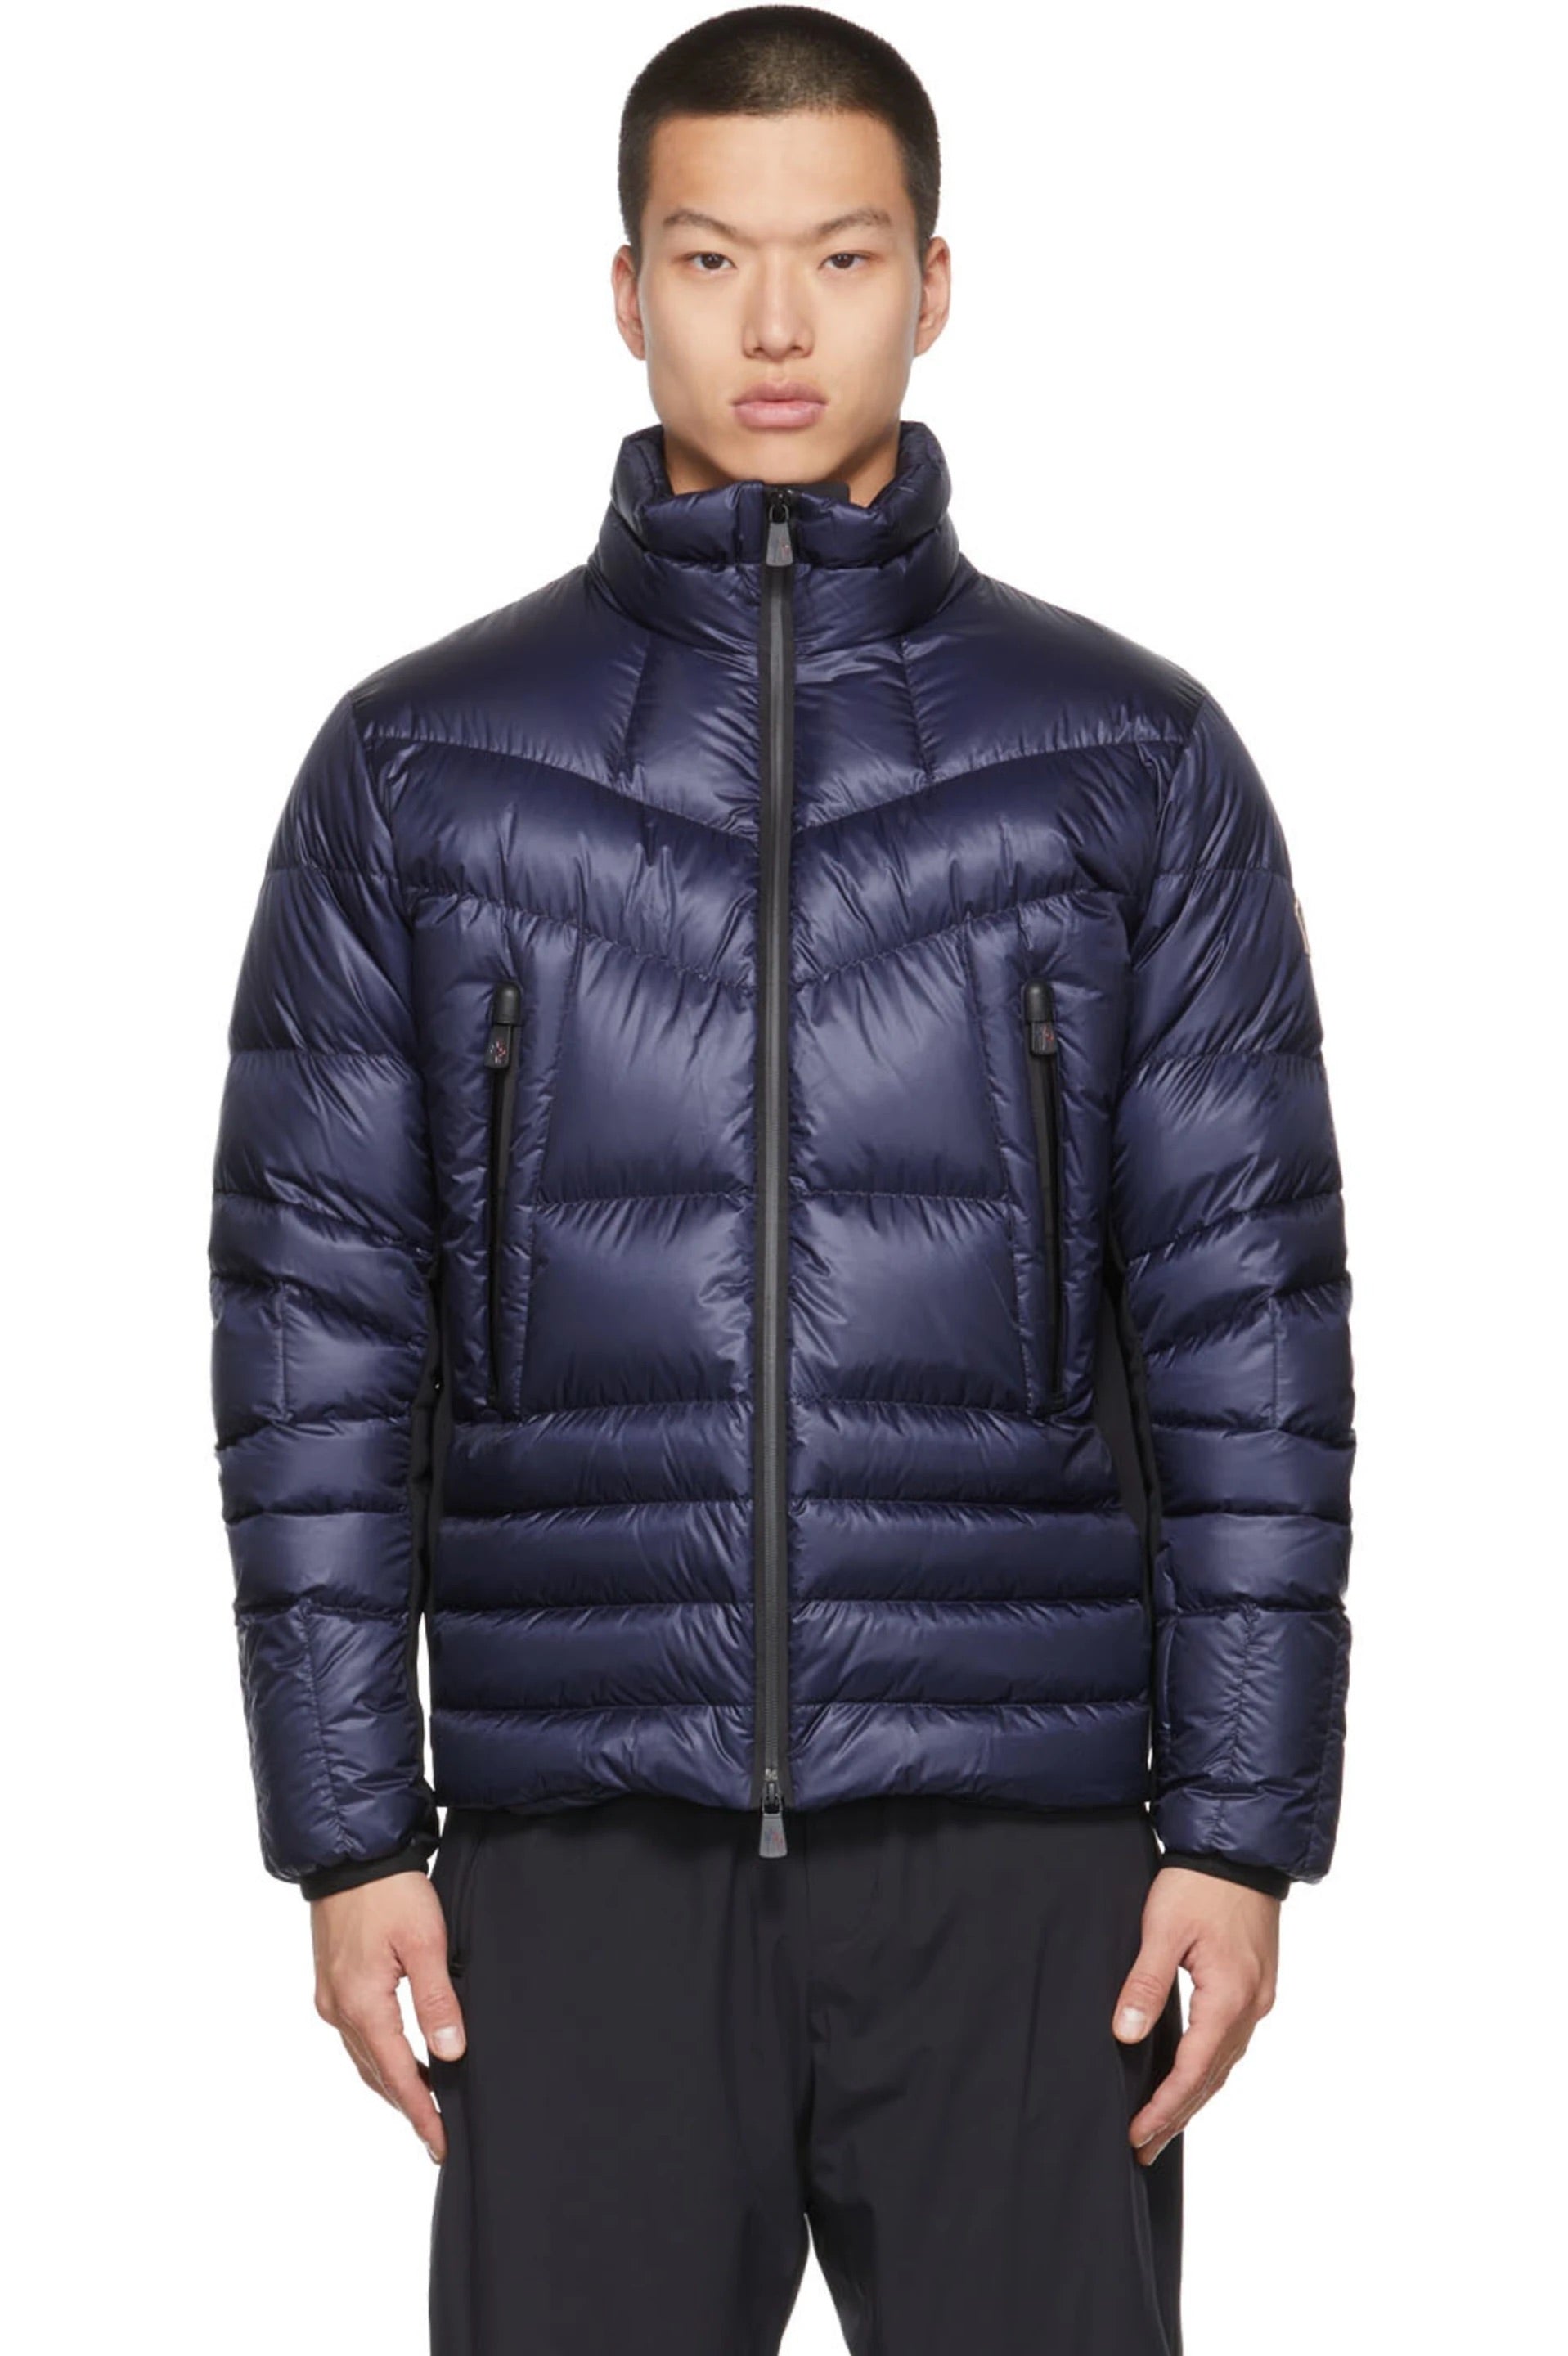 Moncler Grenoble Canmore Jacket - Size 2